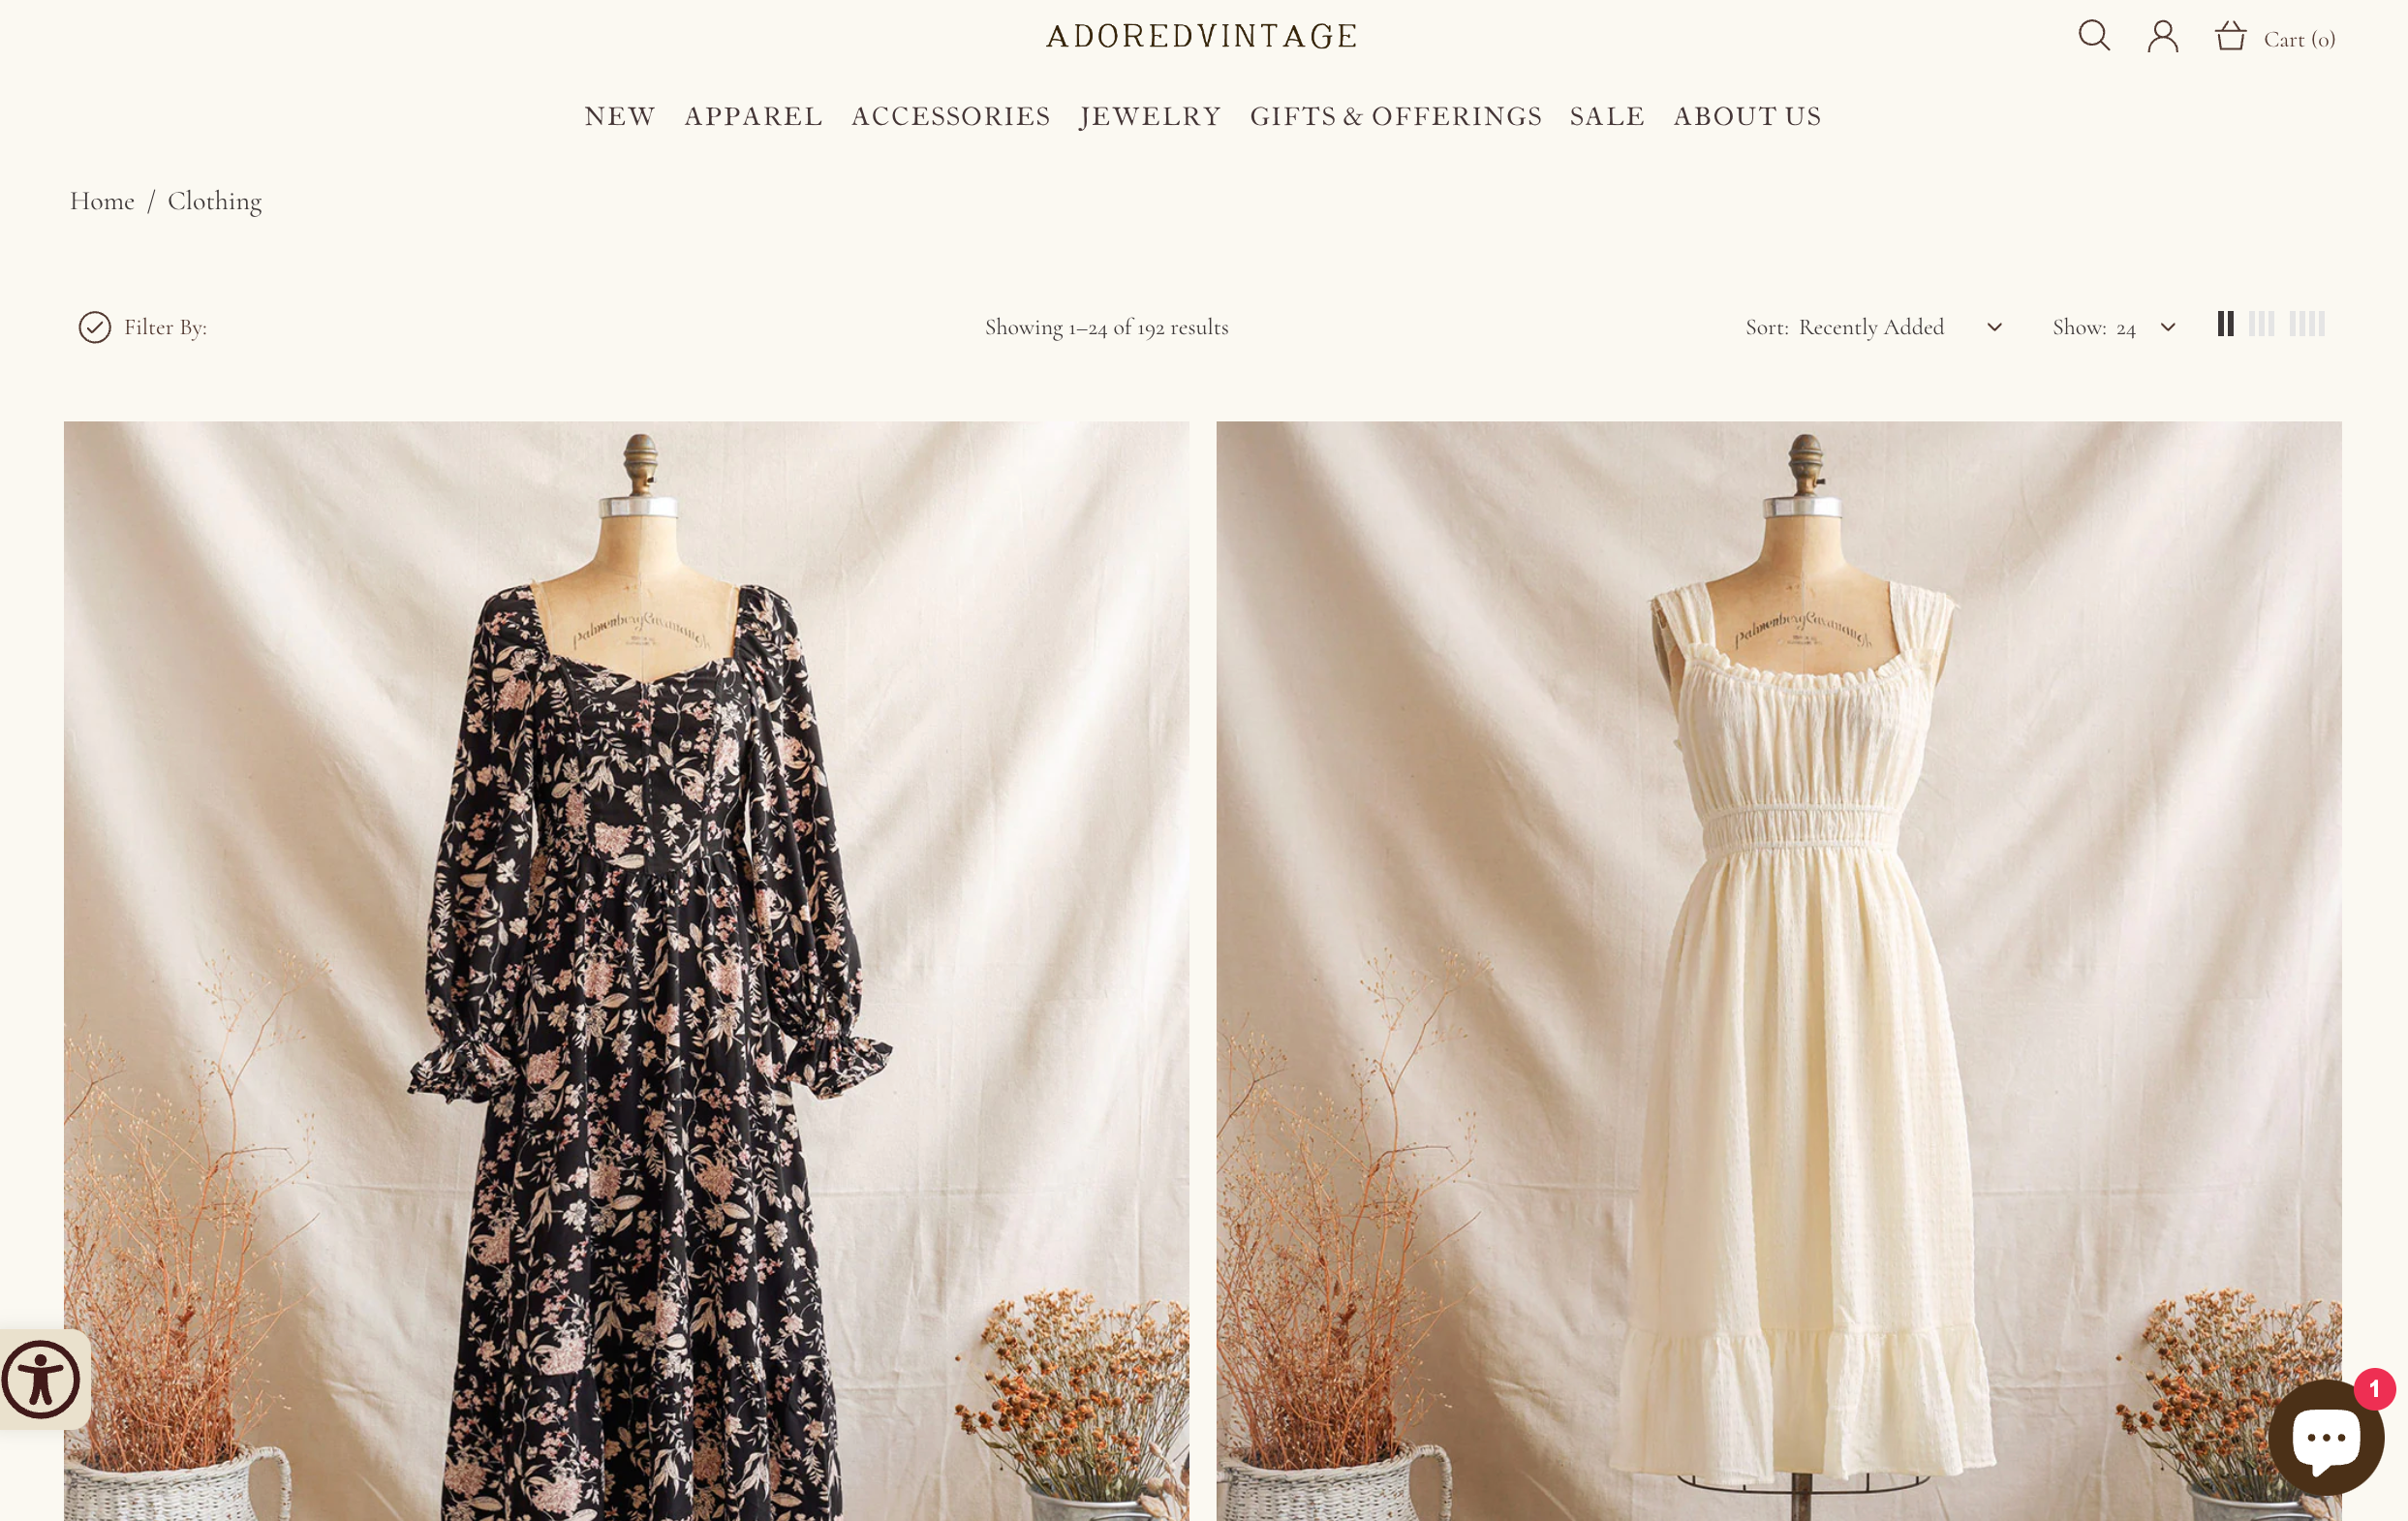 Shopify商店Adored Vintage页面